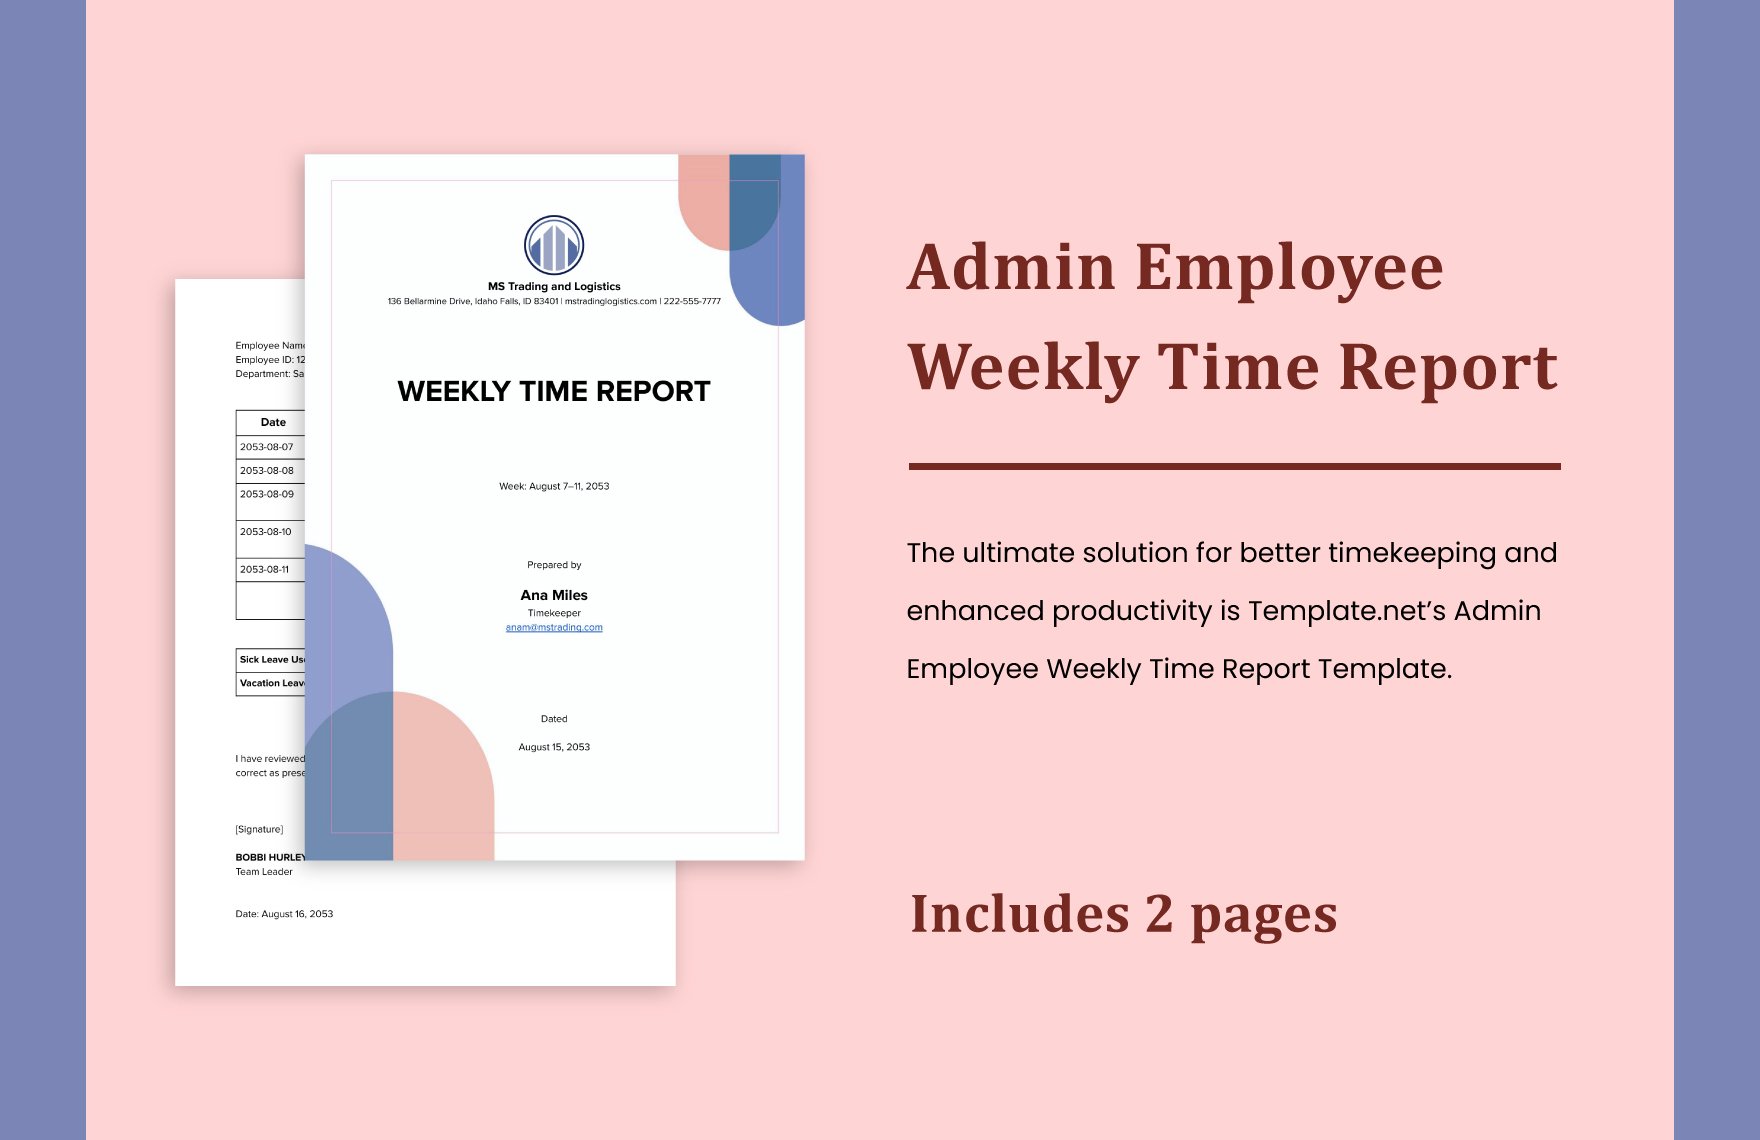 Admin Employee Weekly Time Report